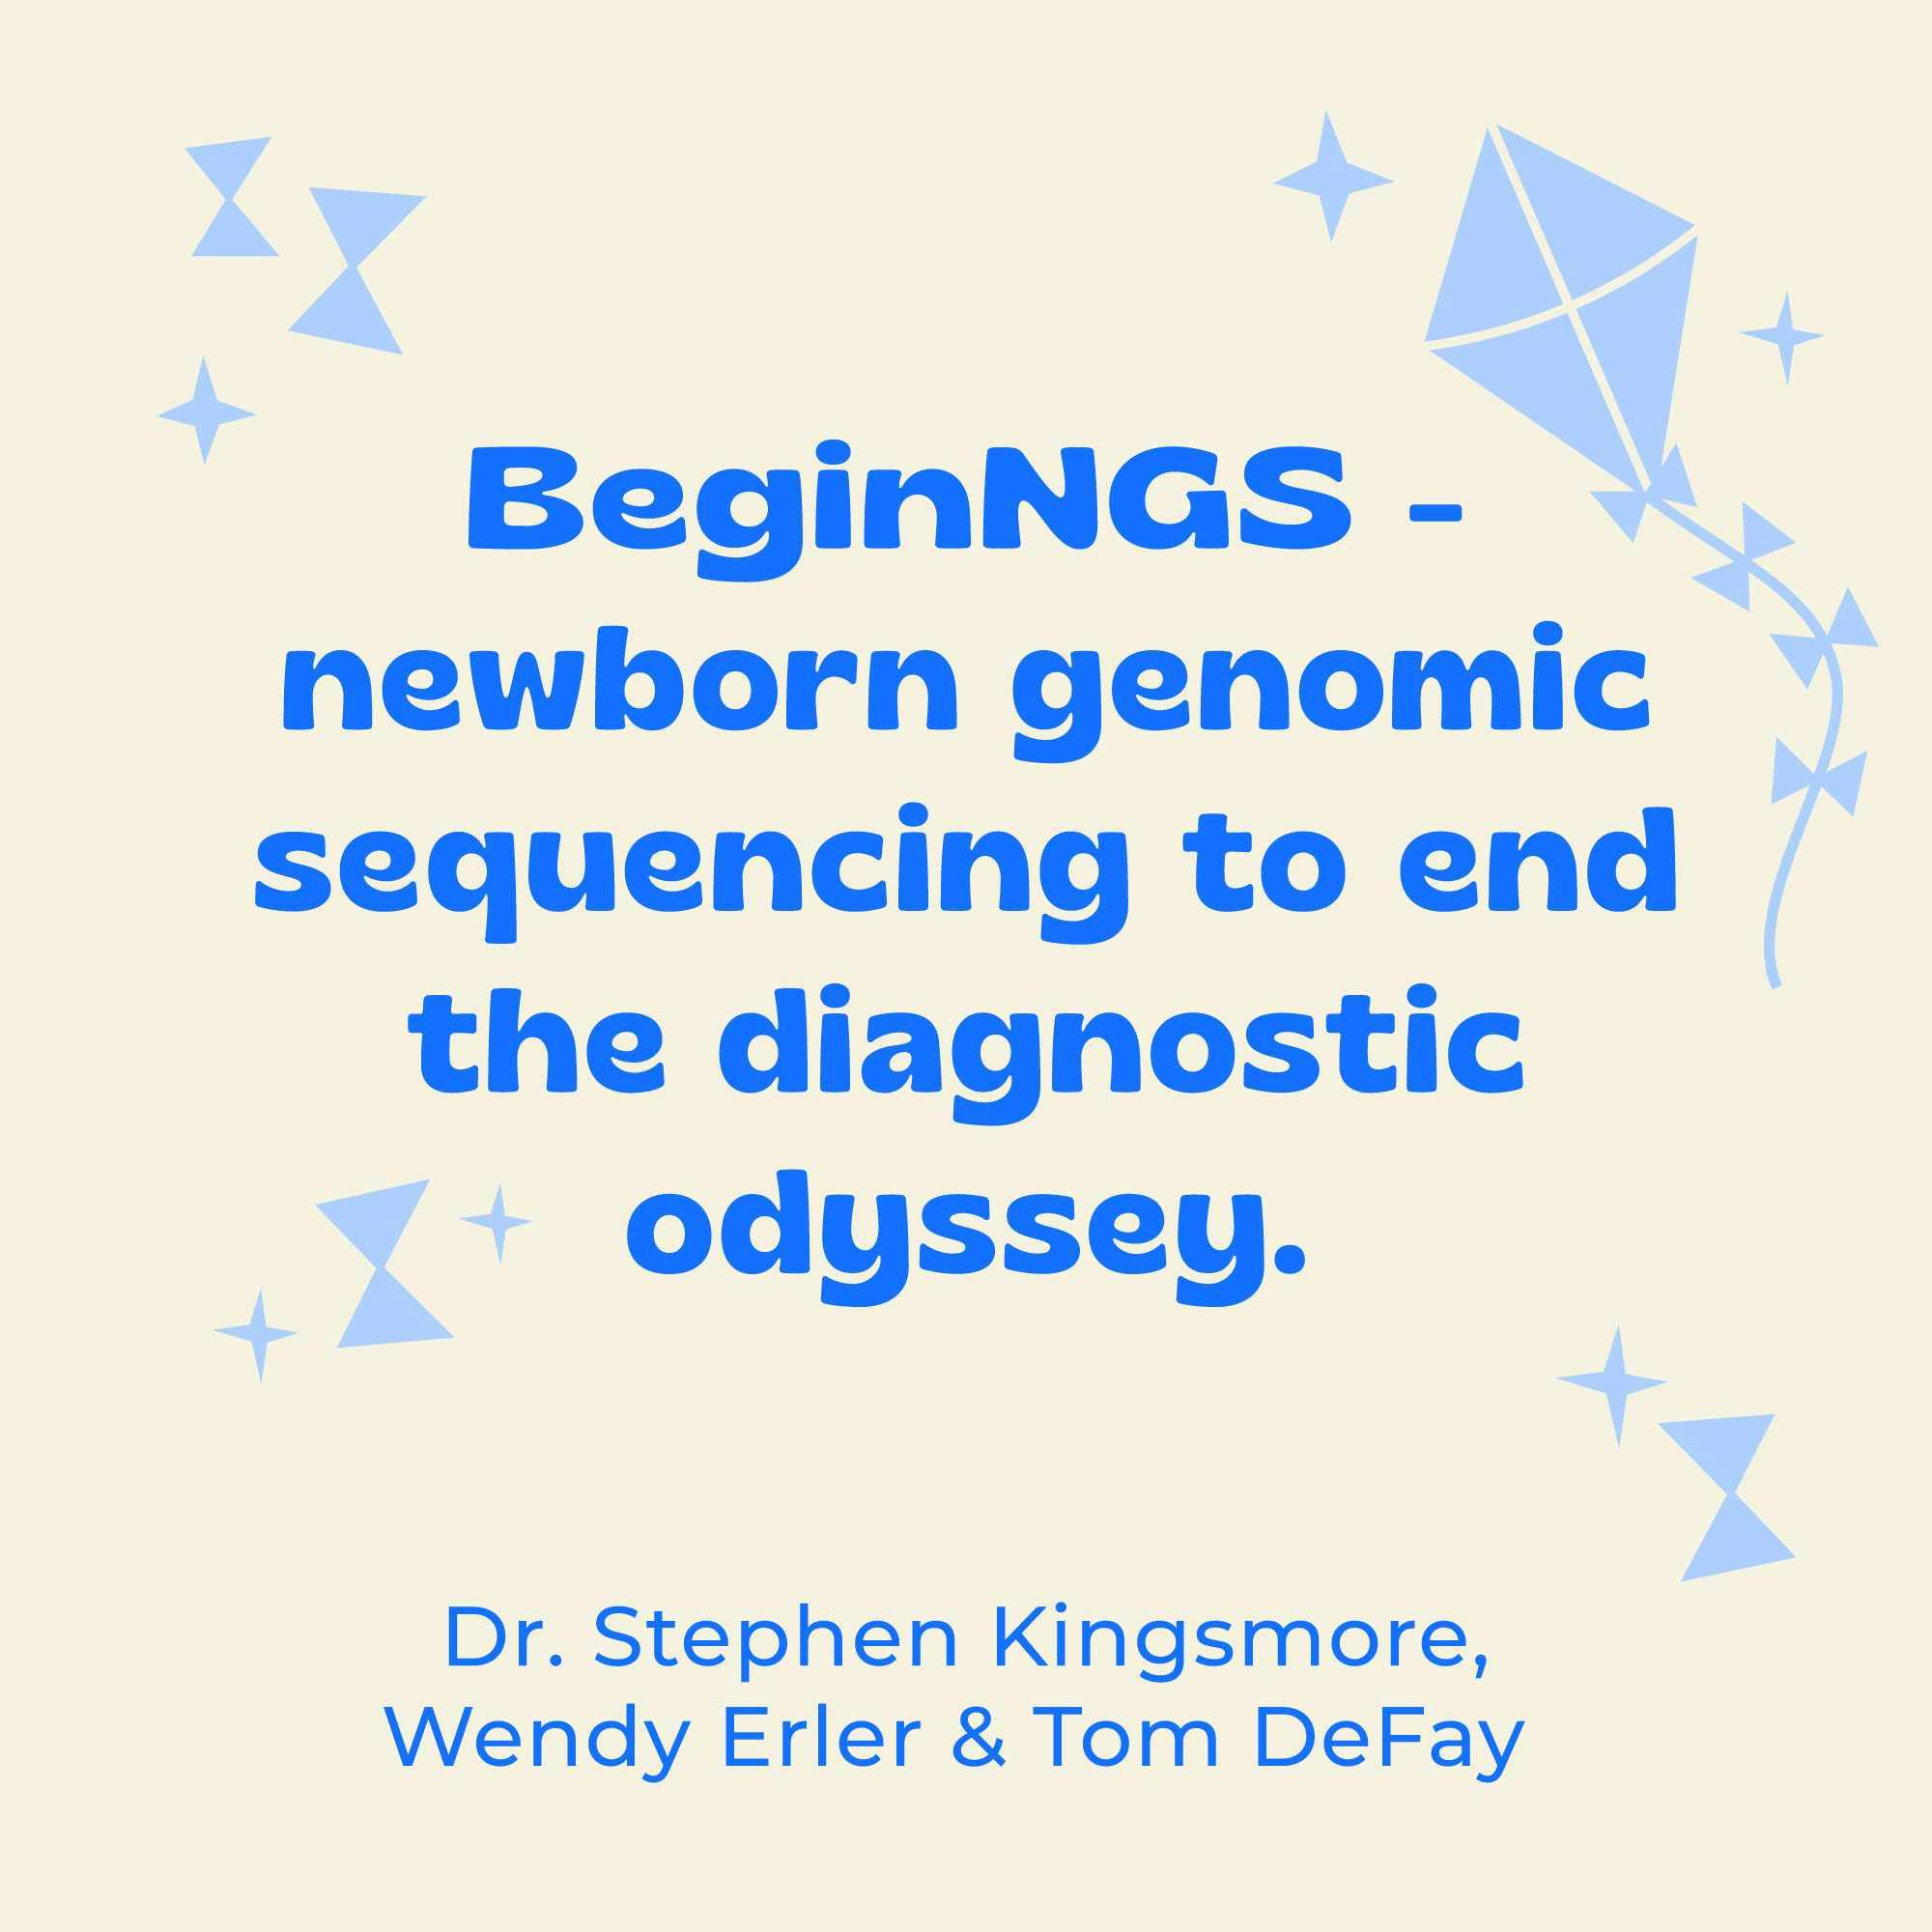 BeginNGS - Newborn Genomic Sequencing to End the Diagnostic Odyssey with Dr. Stephen Kingsmore, Wendy Erler and Tom DeFay